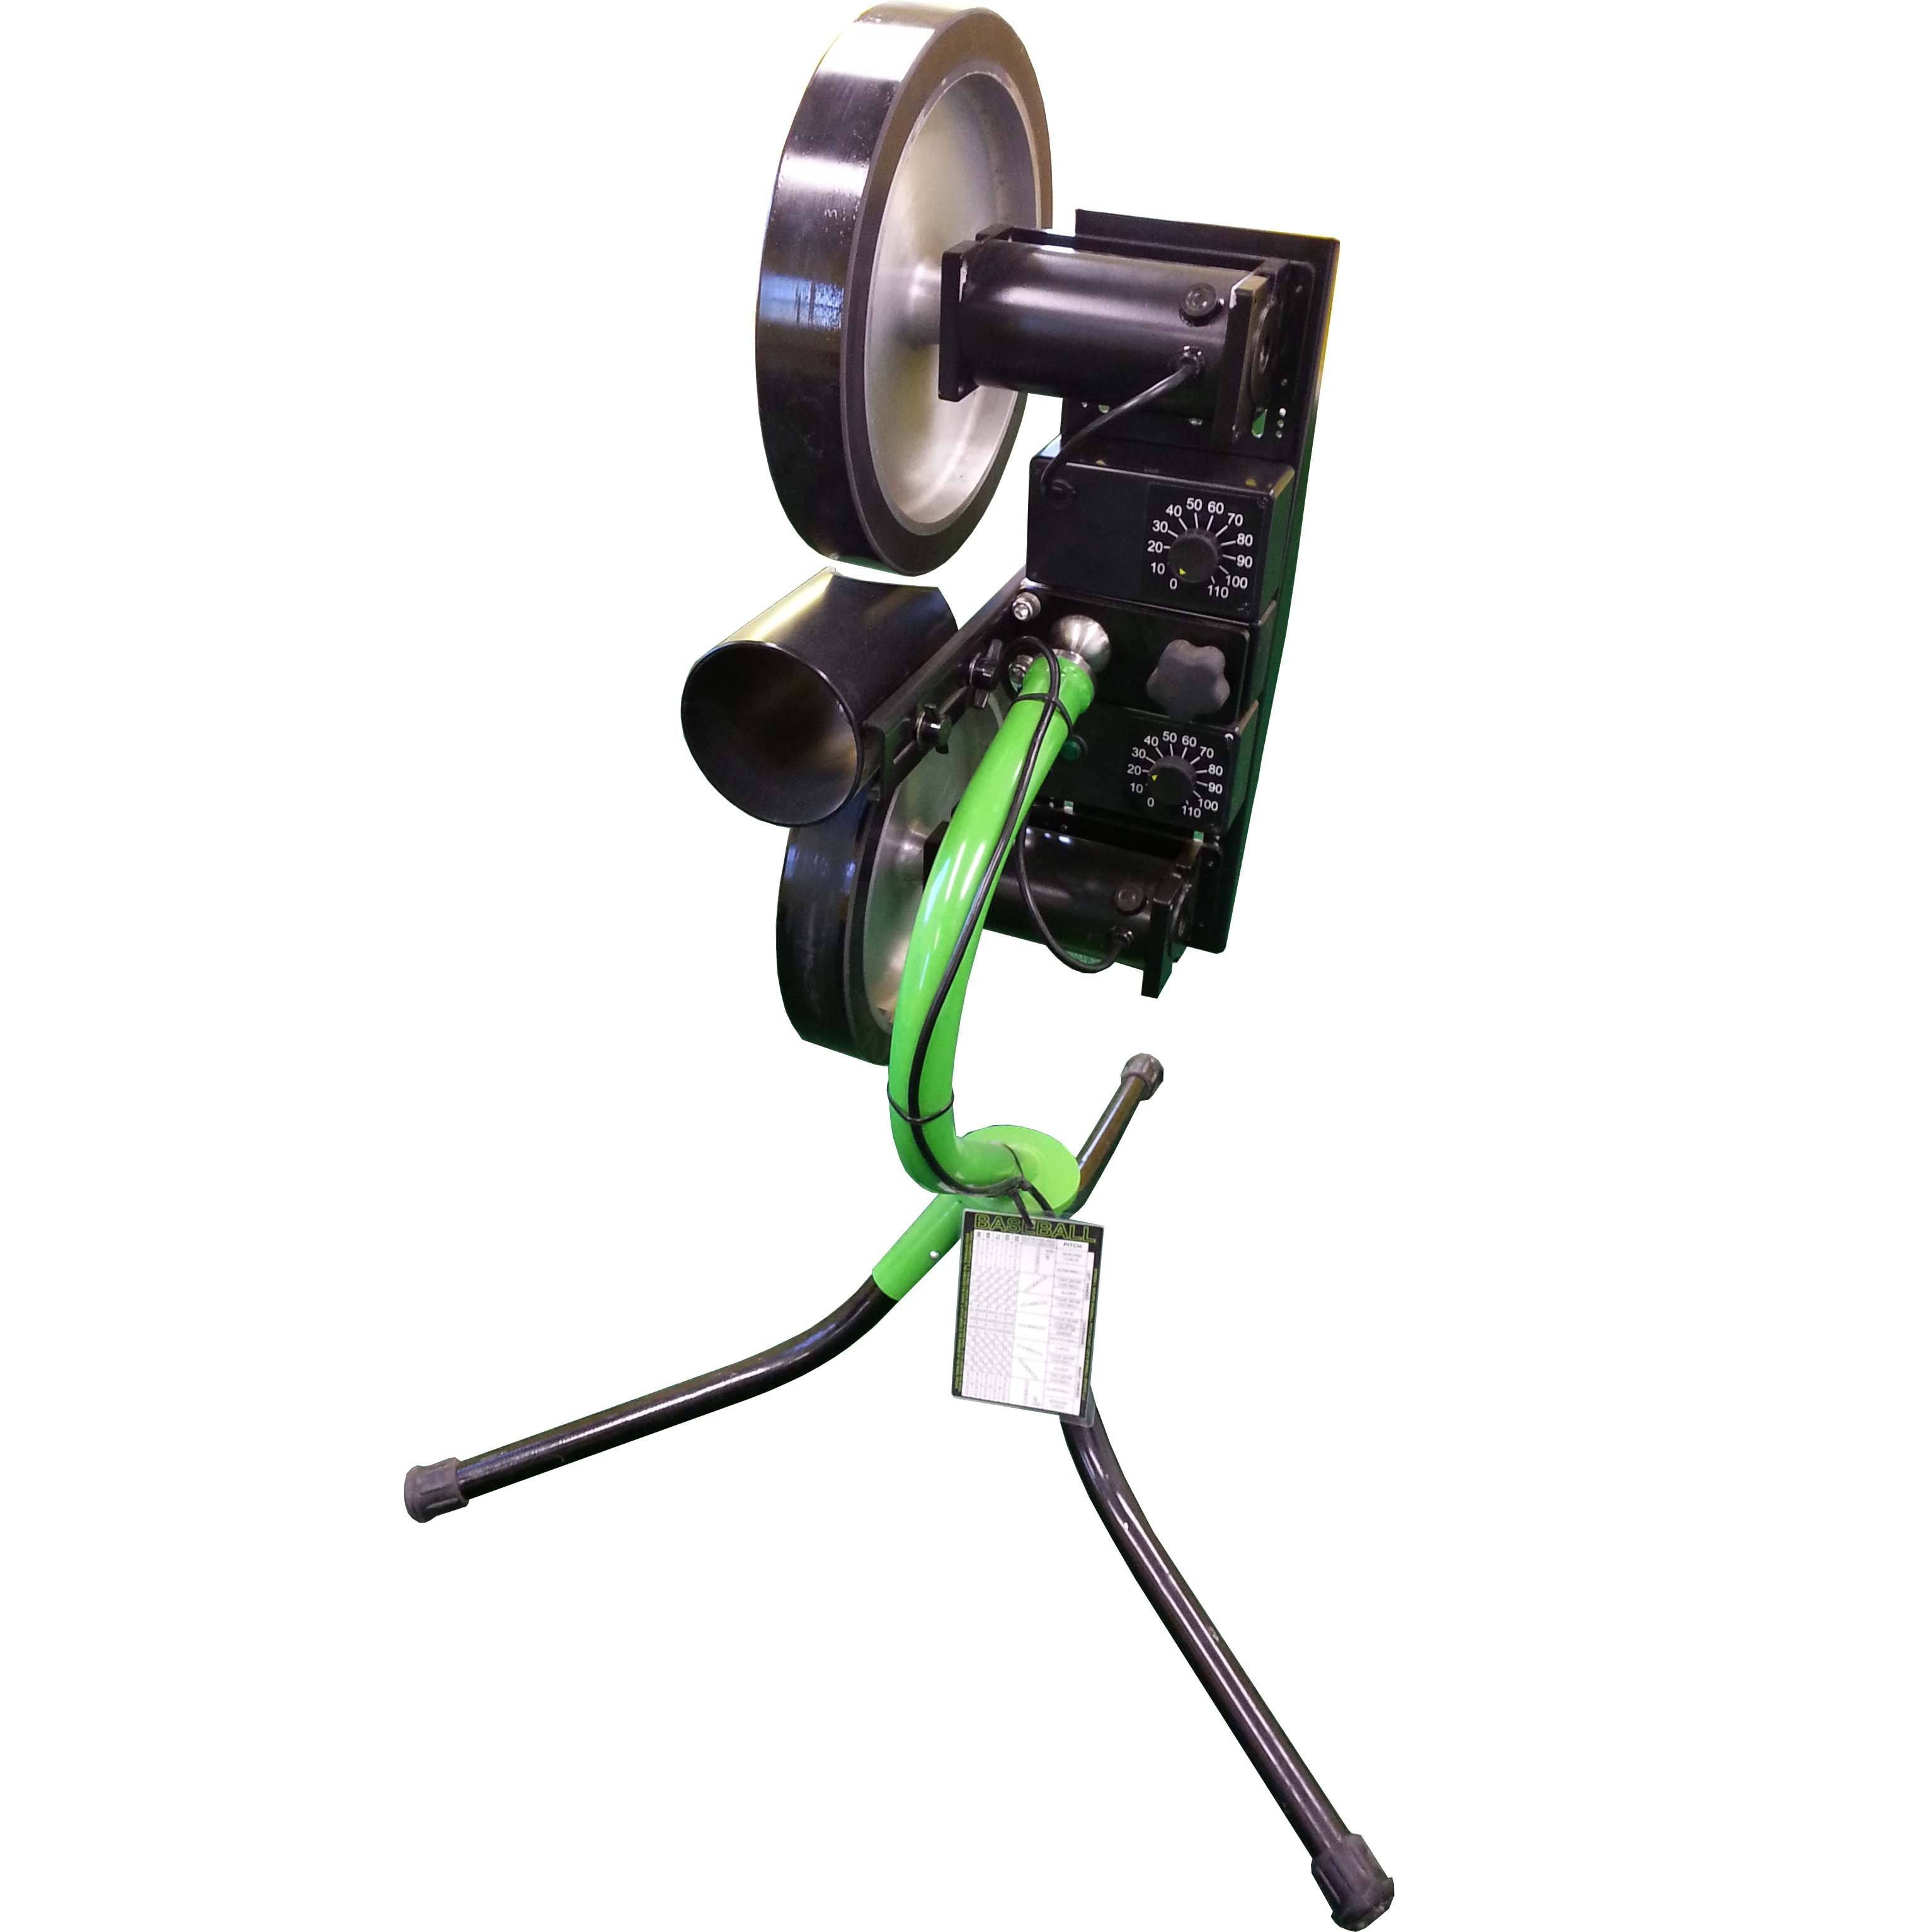 Spinball 2 wheel pitching machine for softball rear view